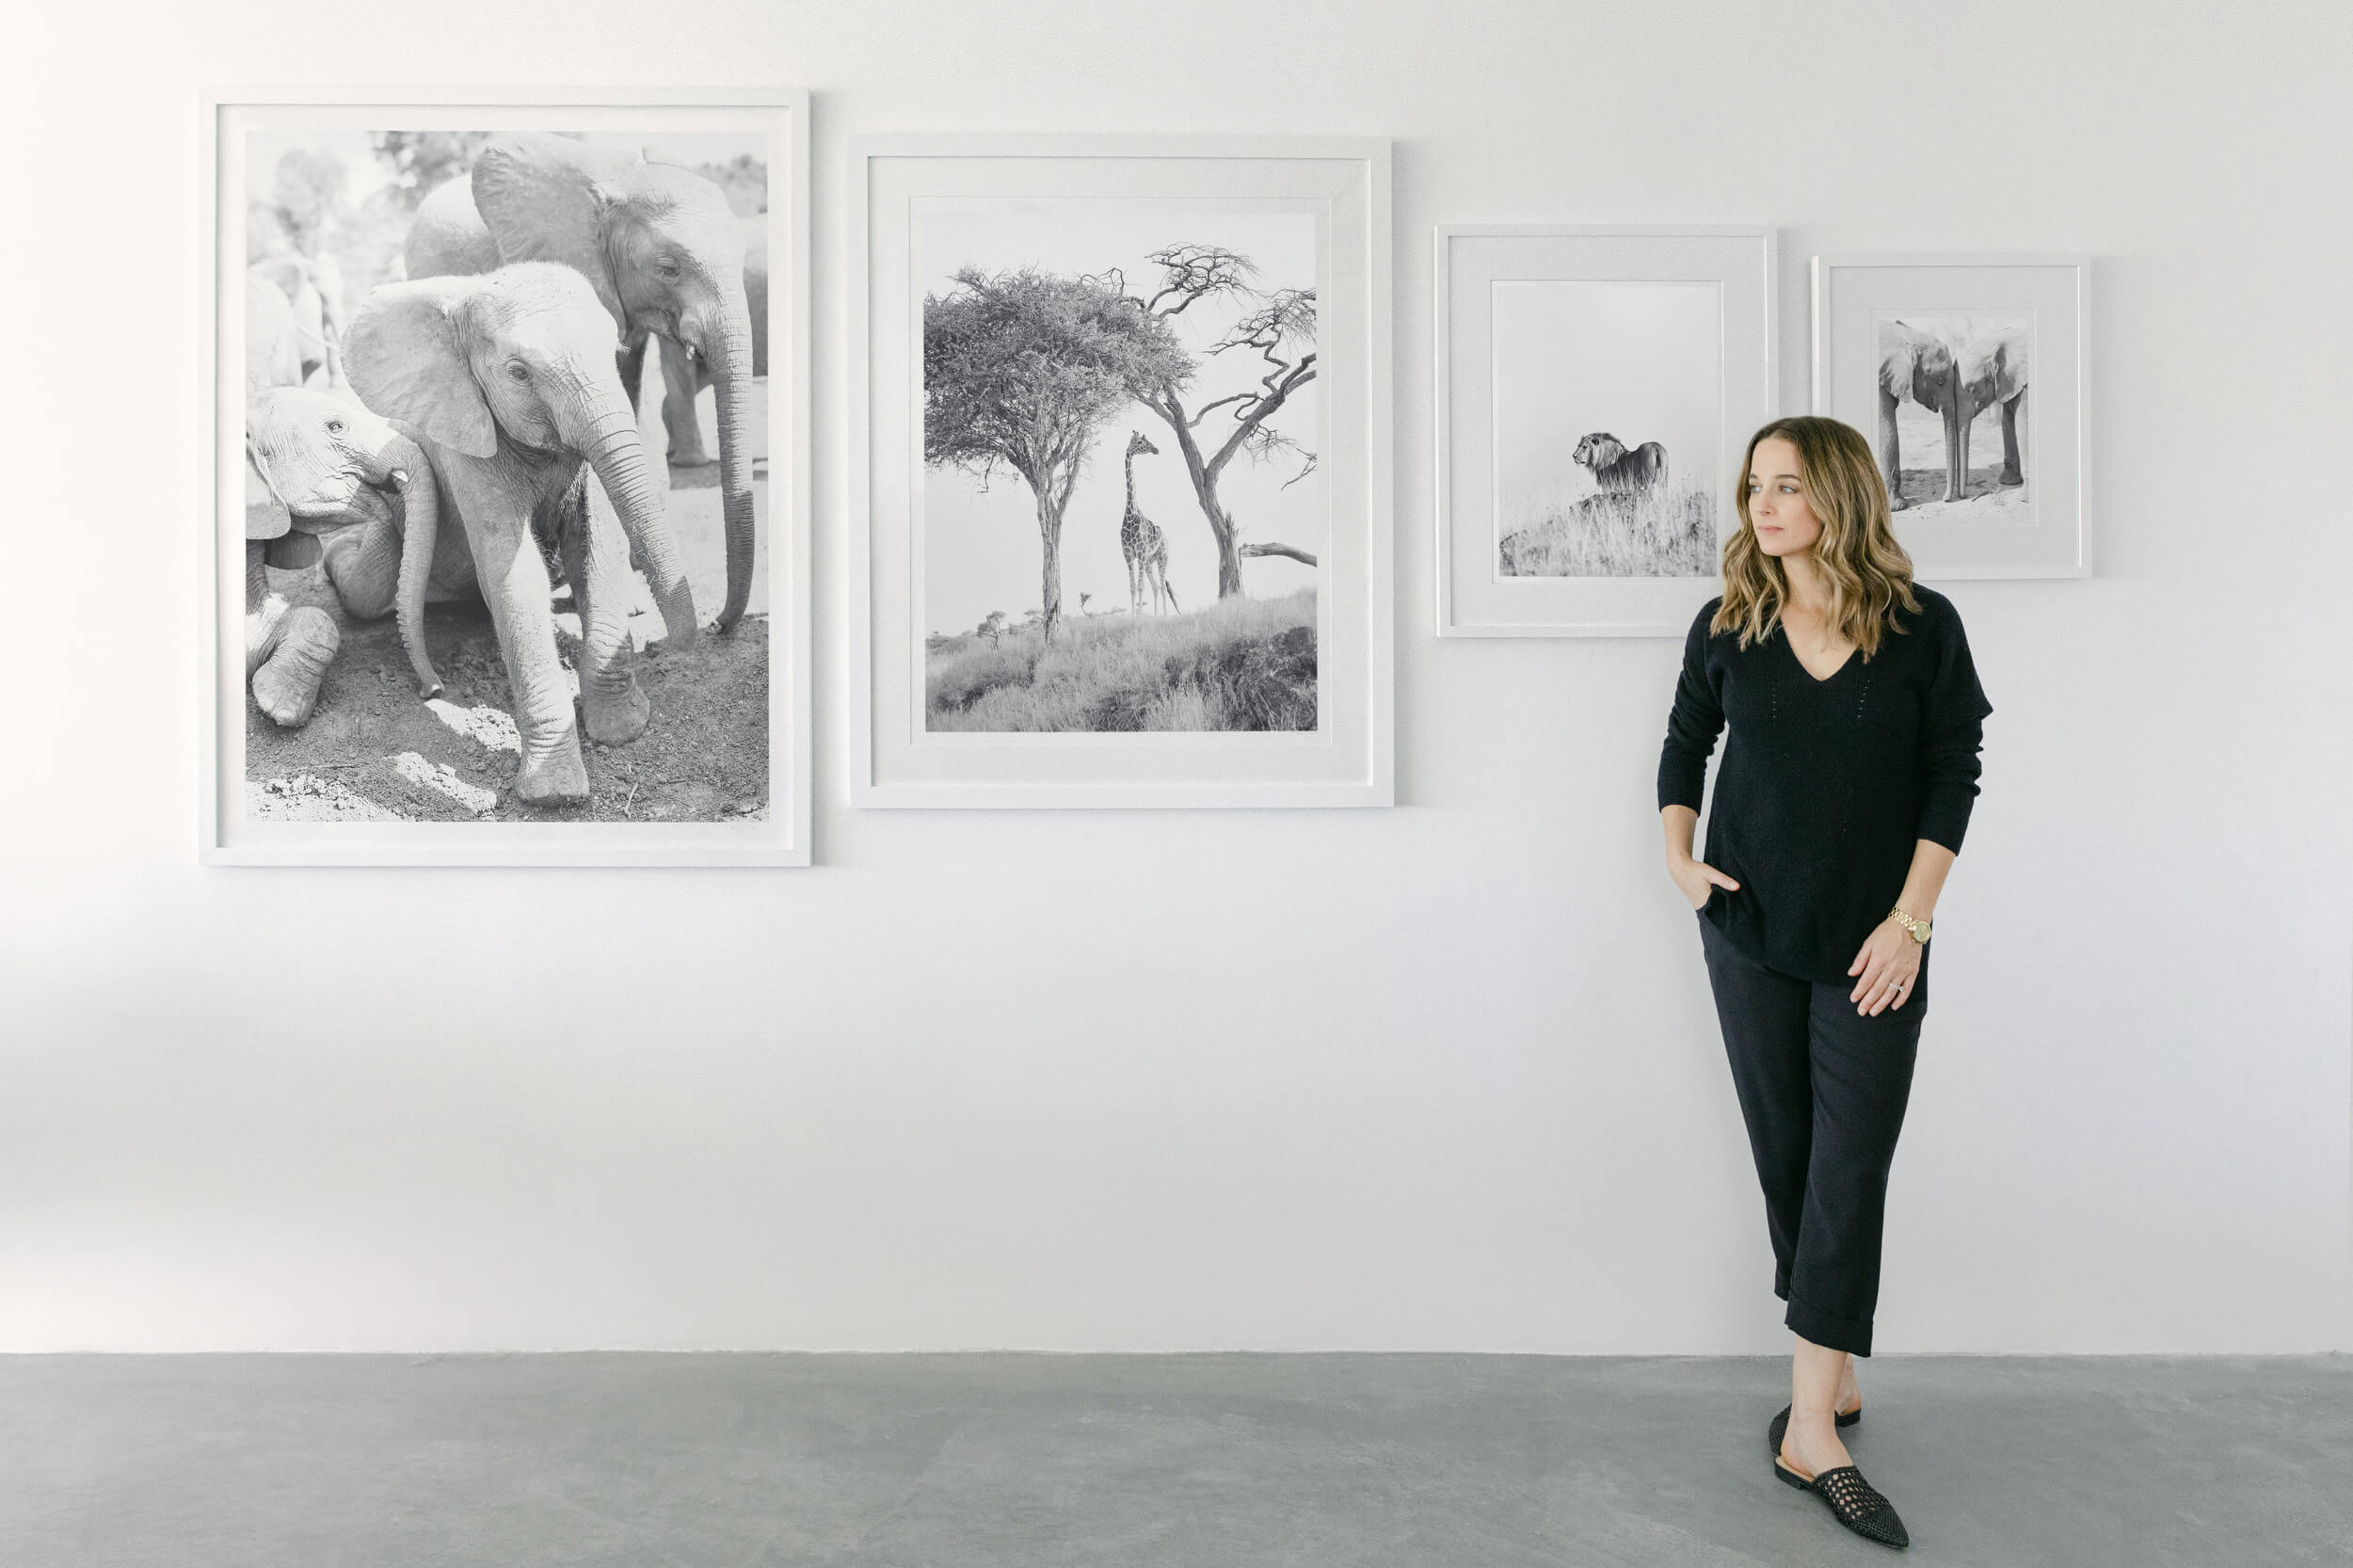 KT Merry's Render Loyalty print shop integrates business for good through wildlife conservation